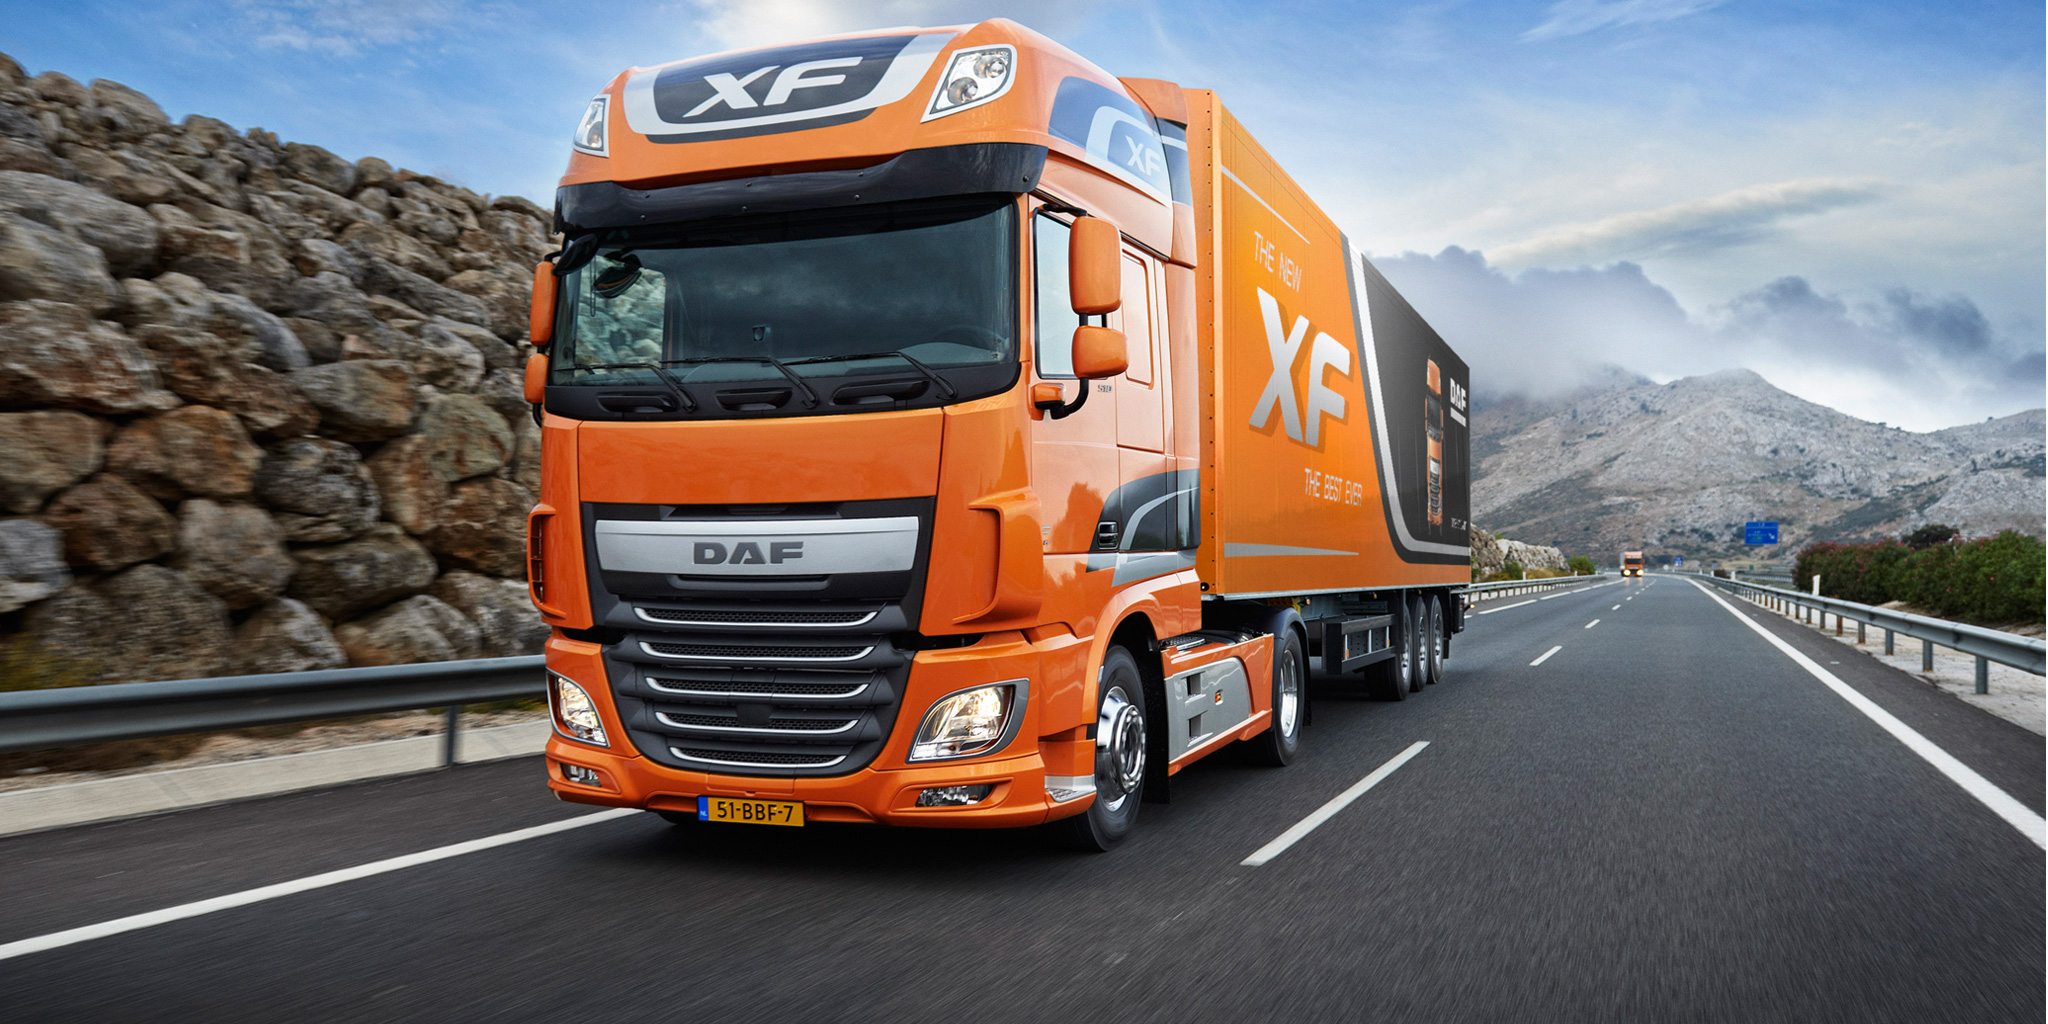 Introducing vehicle dynamic products for DAF trucks